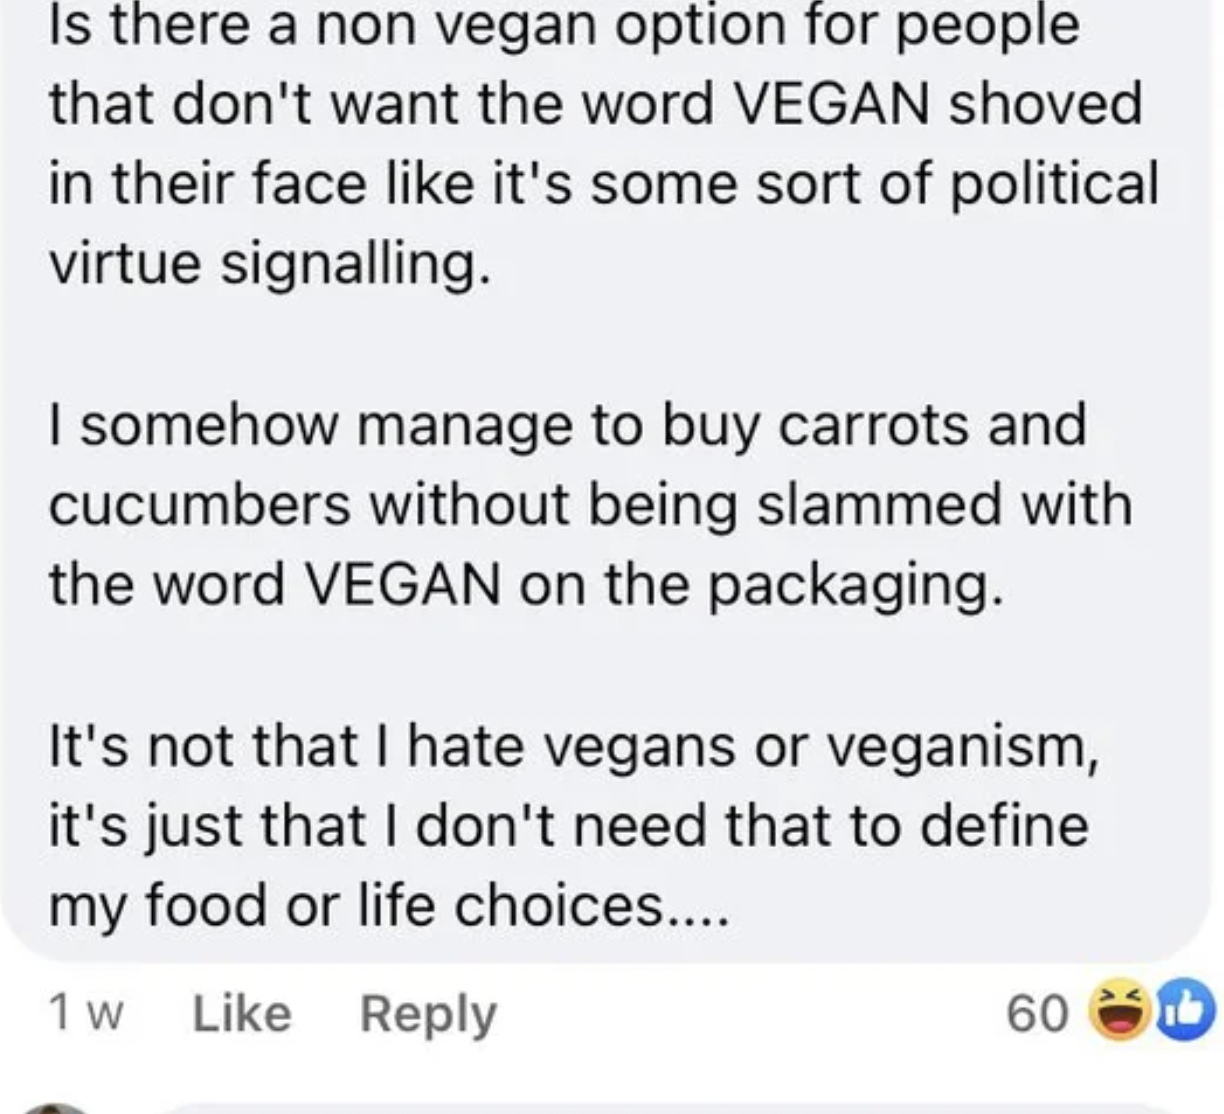 Facepalms - paper - Is there a non vegan option for people that don't want the word Vegan shoved in their face it's some sort of political virtue signalling. I somehow manage to buy carrots and cucumbers without being slammed with the word Vegan on the pa